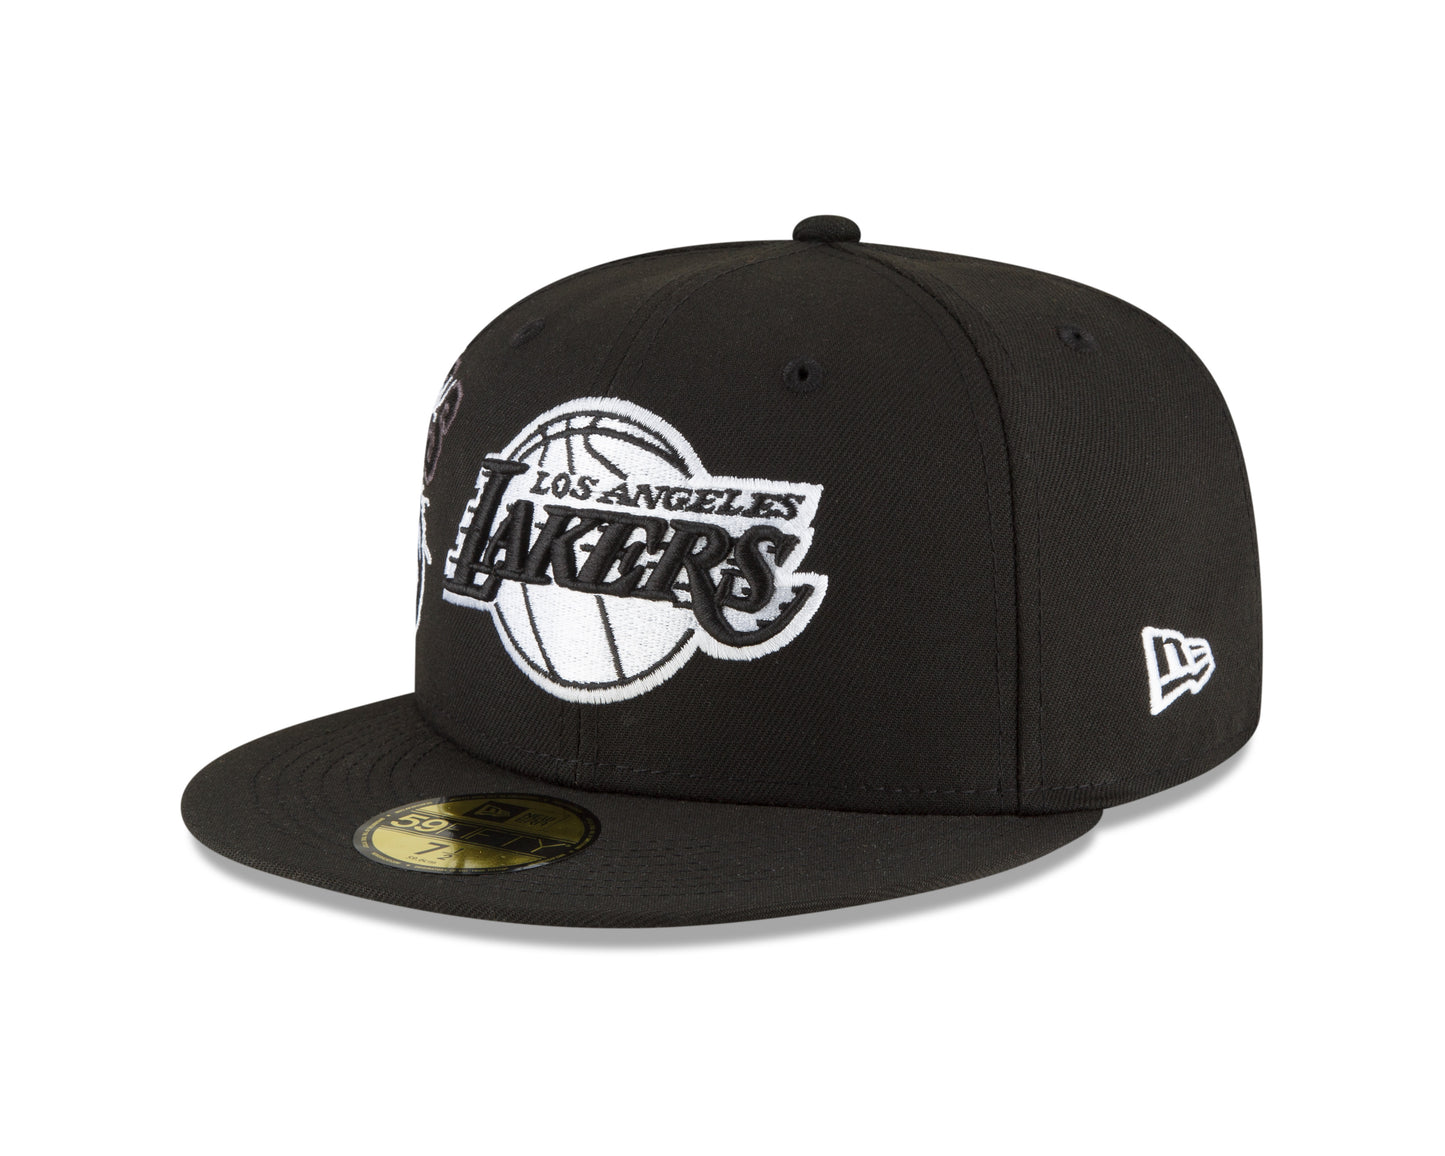 Los Angeles Lakers New Era Black and White Back Half 59fifty Fitted Hat